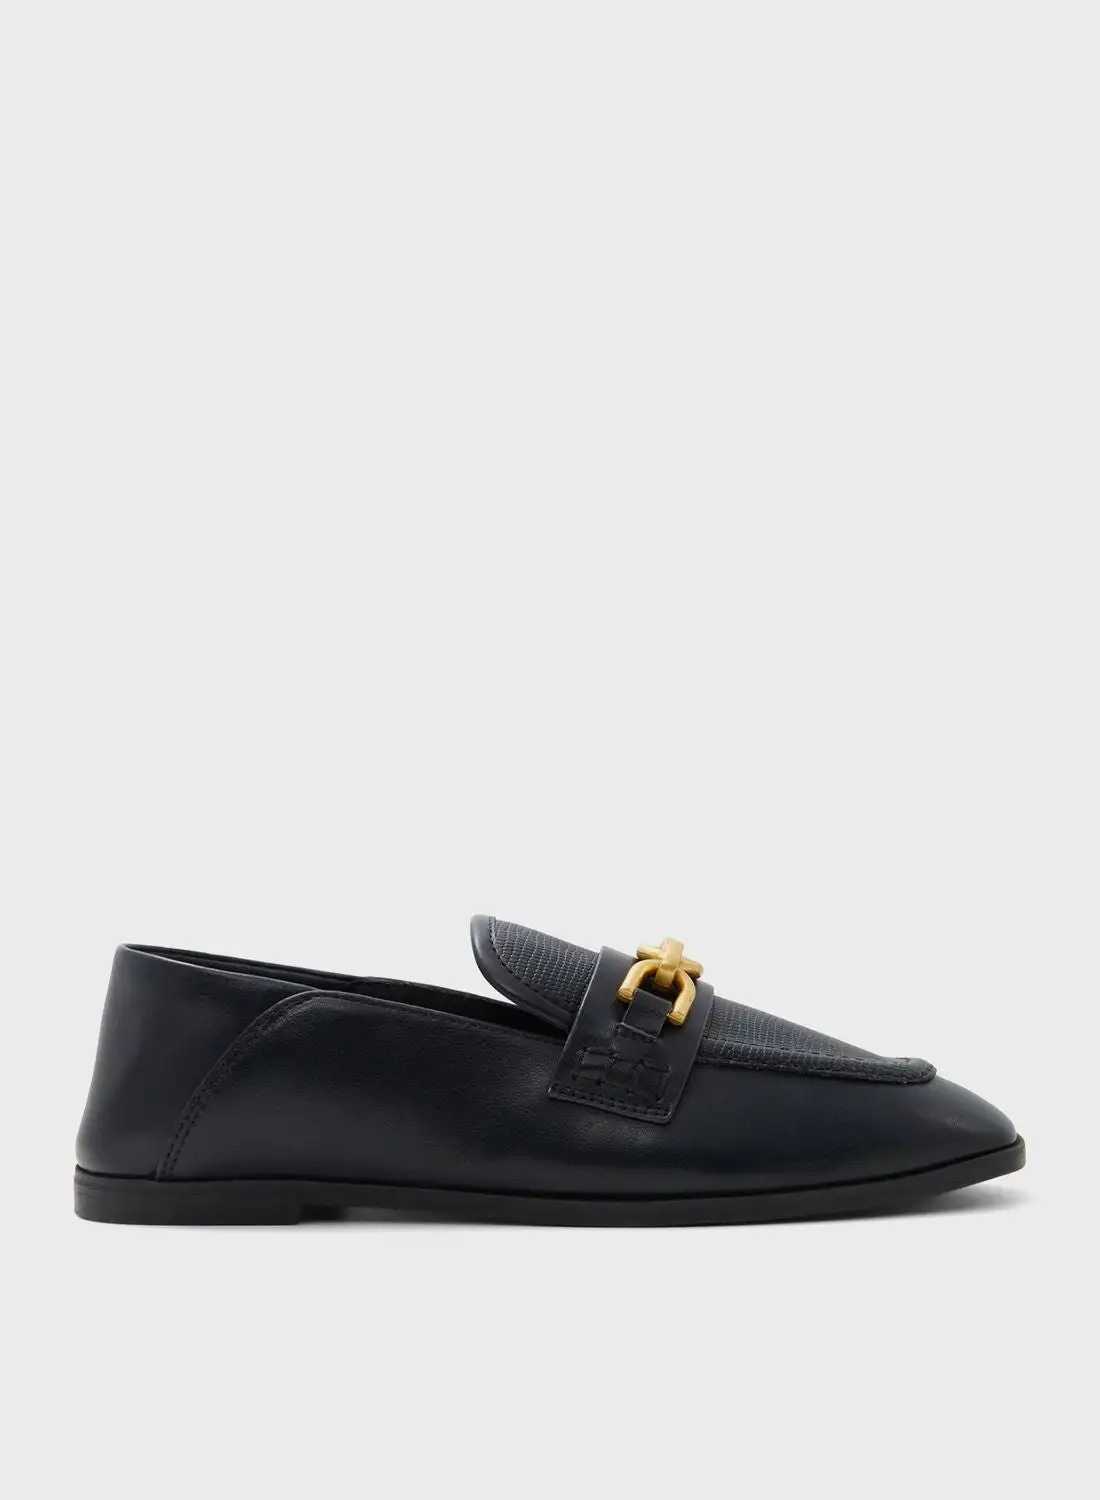 CALL IT SPRING Graceyy Flats Slip On Loafer